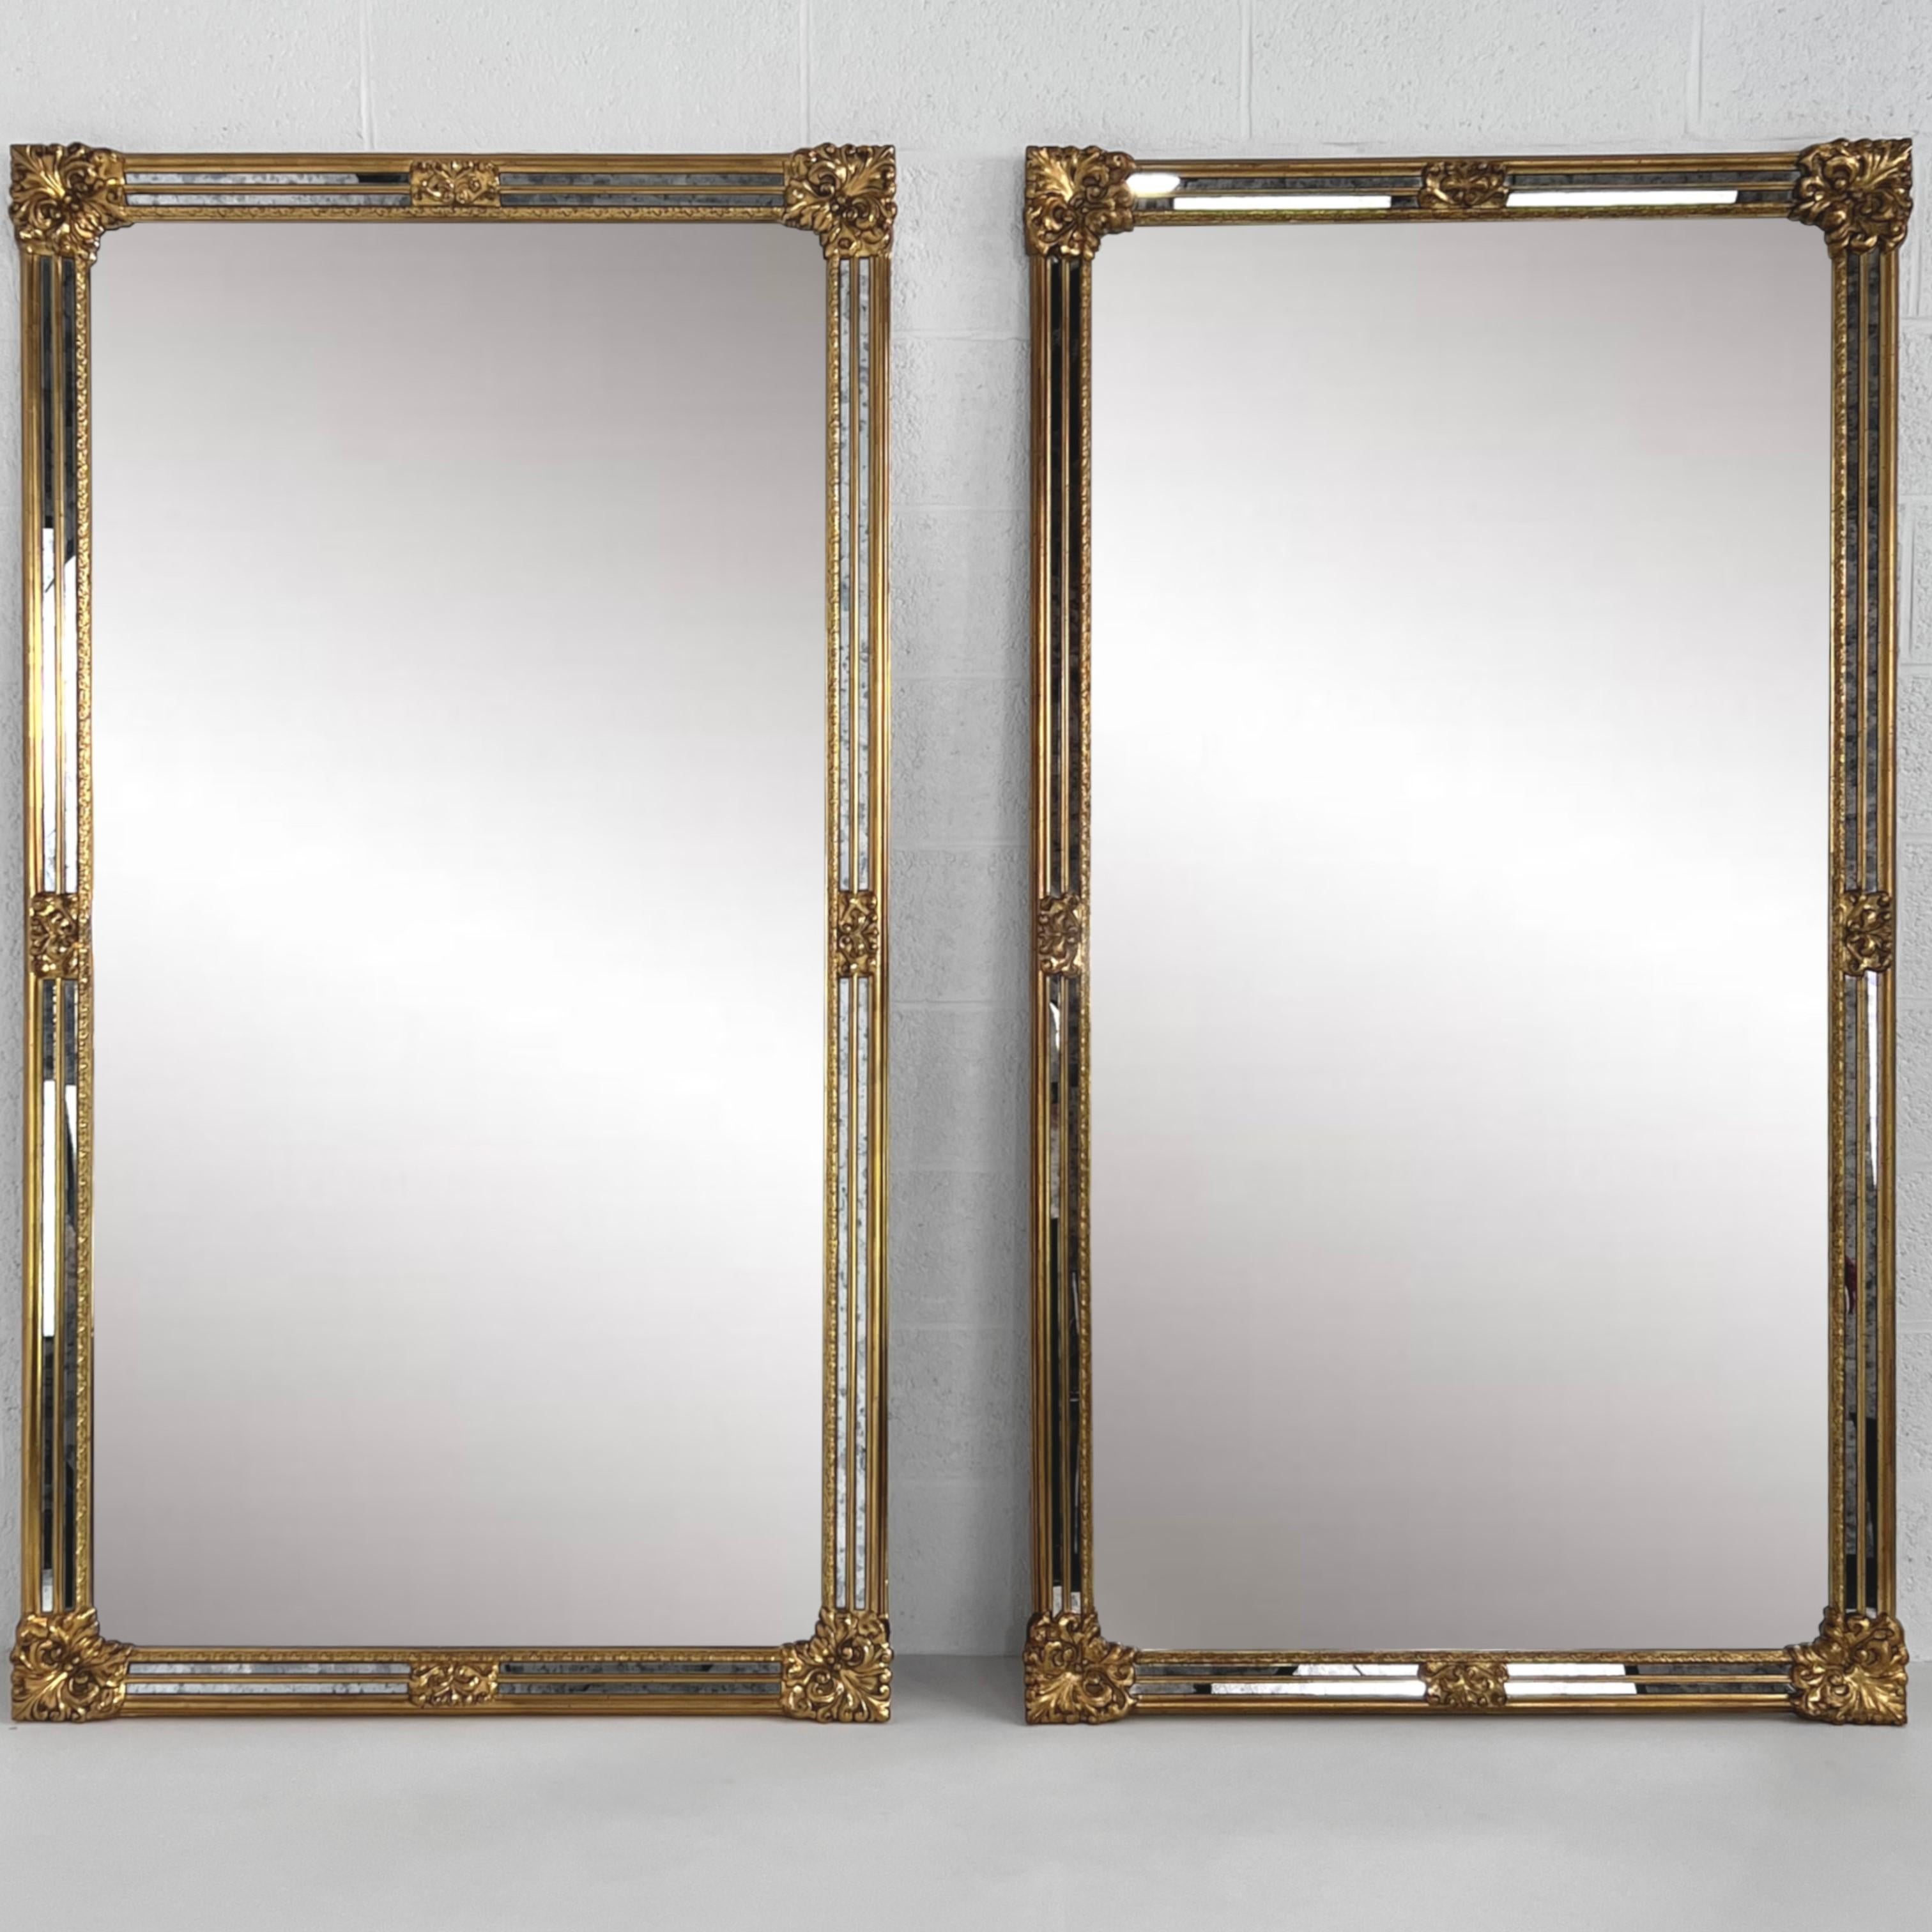 Regency High-Quality Gilded Glazing Bead and Bevelled Pair of Large Mirrors For Sale